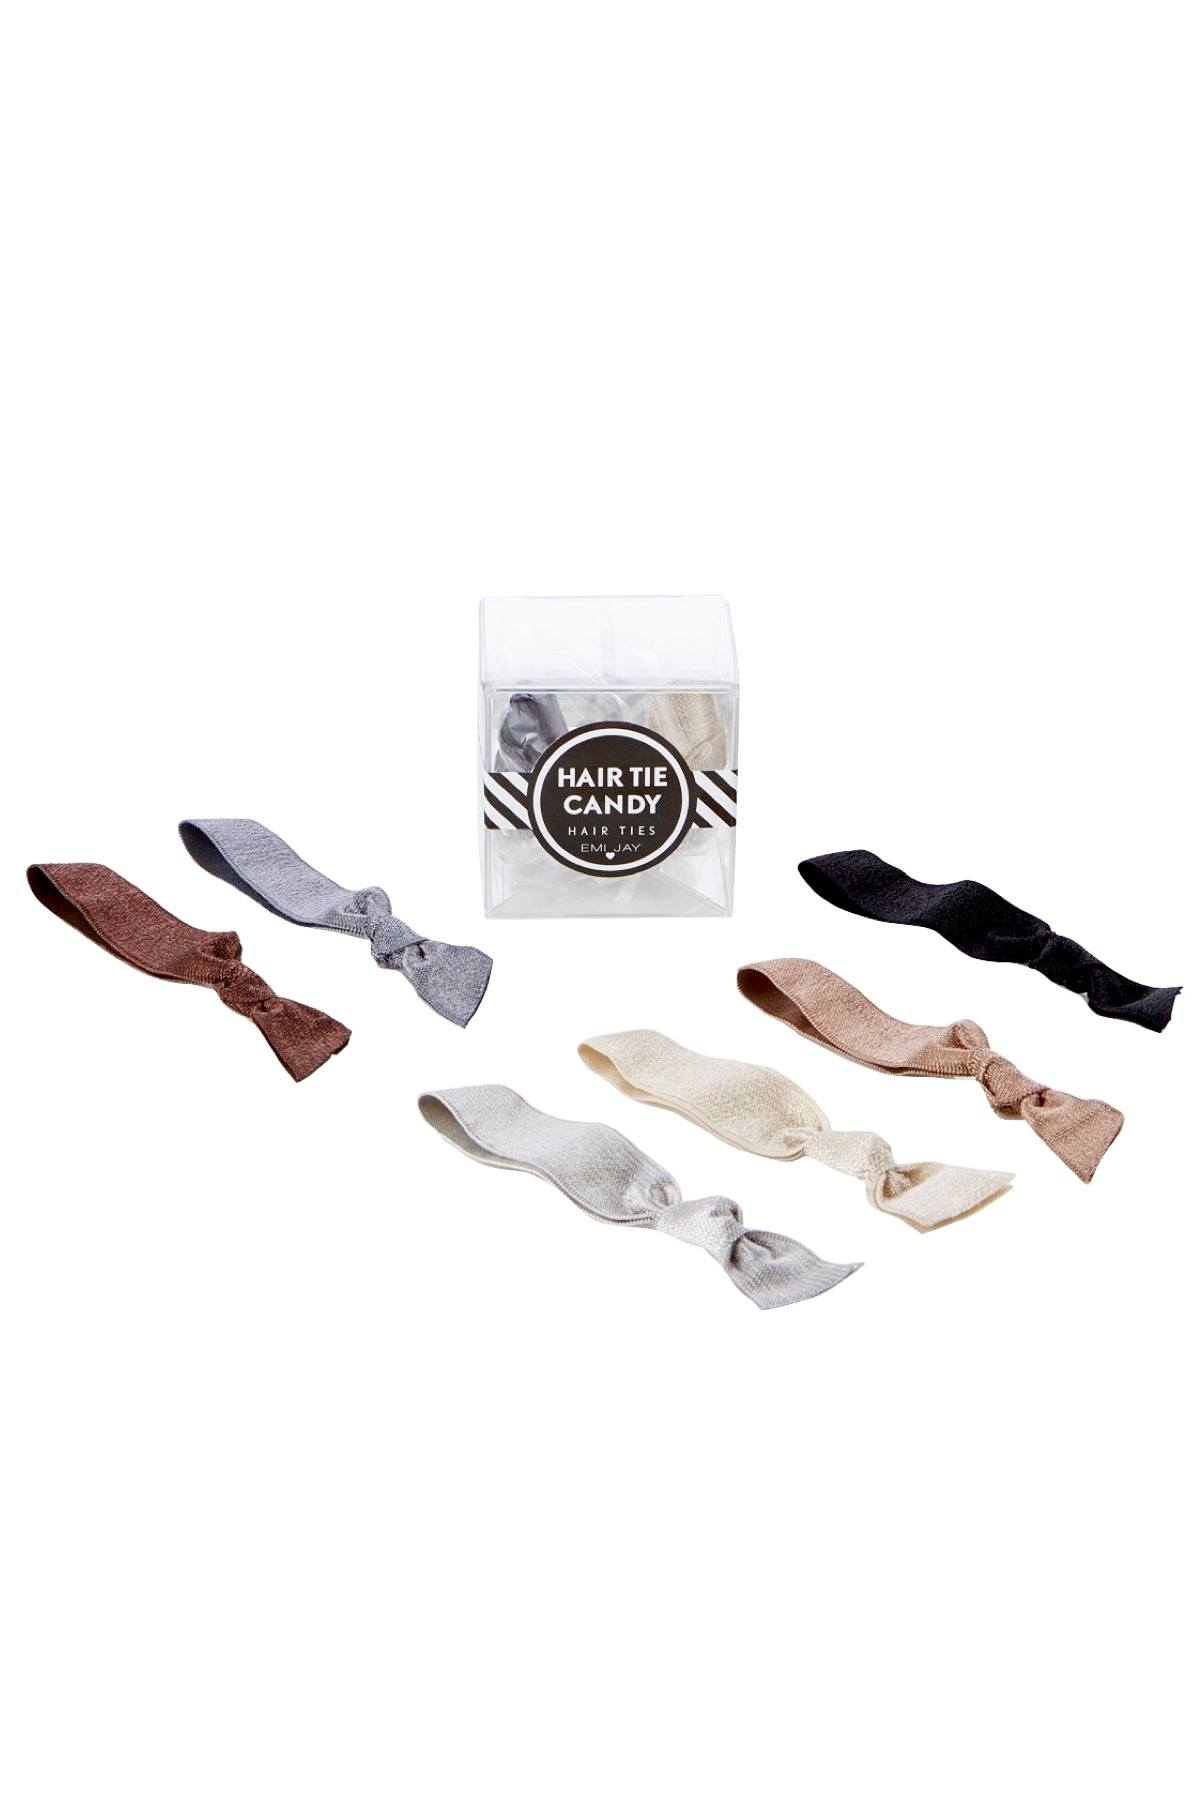 EMI JAY Classic Hair Tie Candy 12 Pack Hair Ties